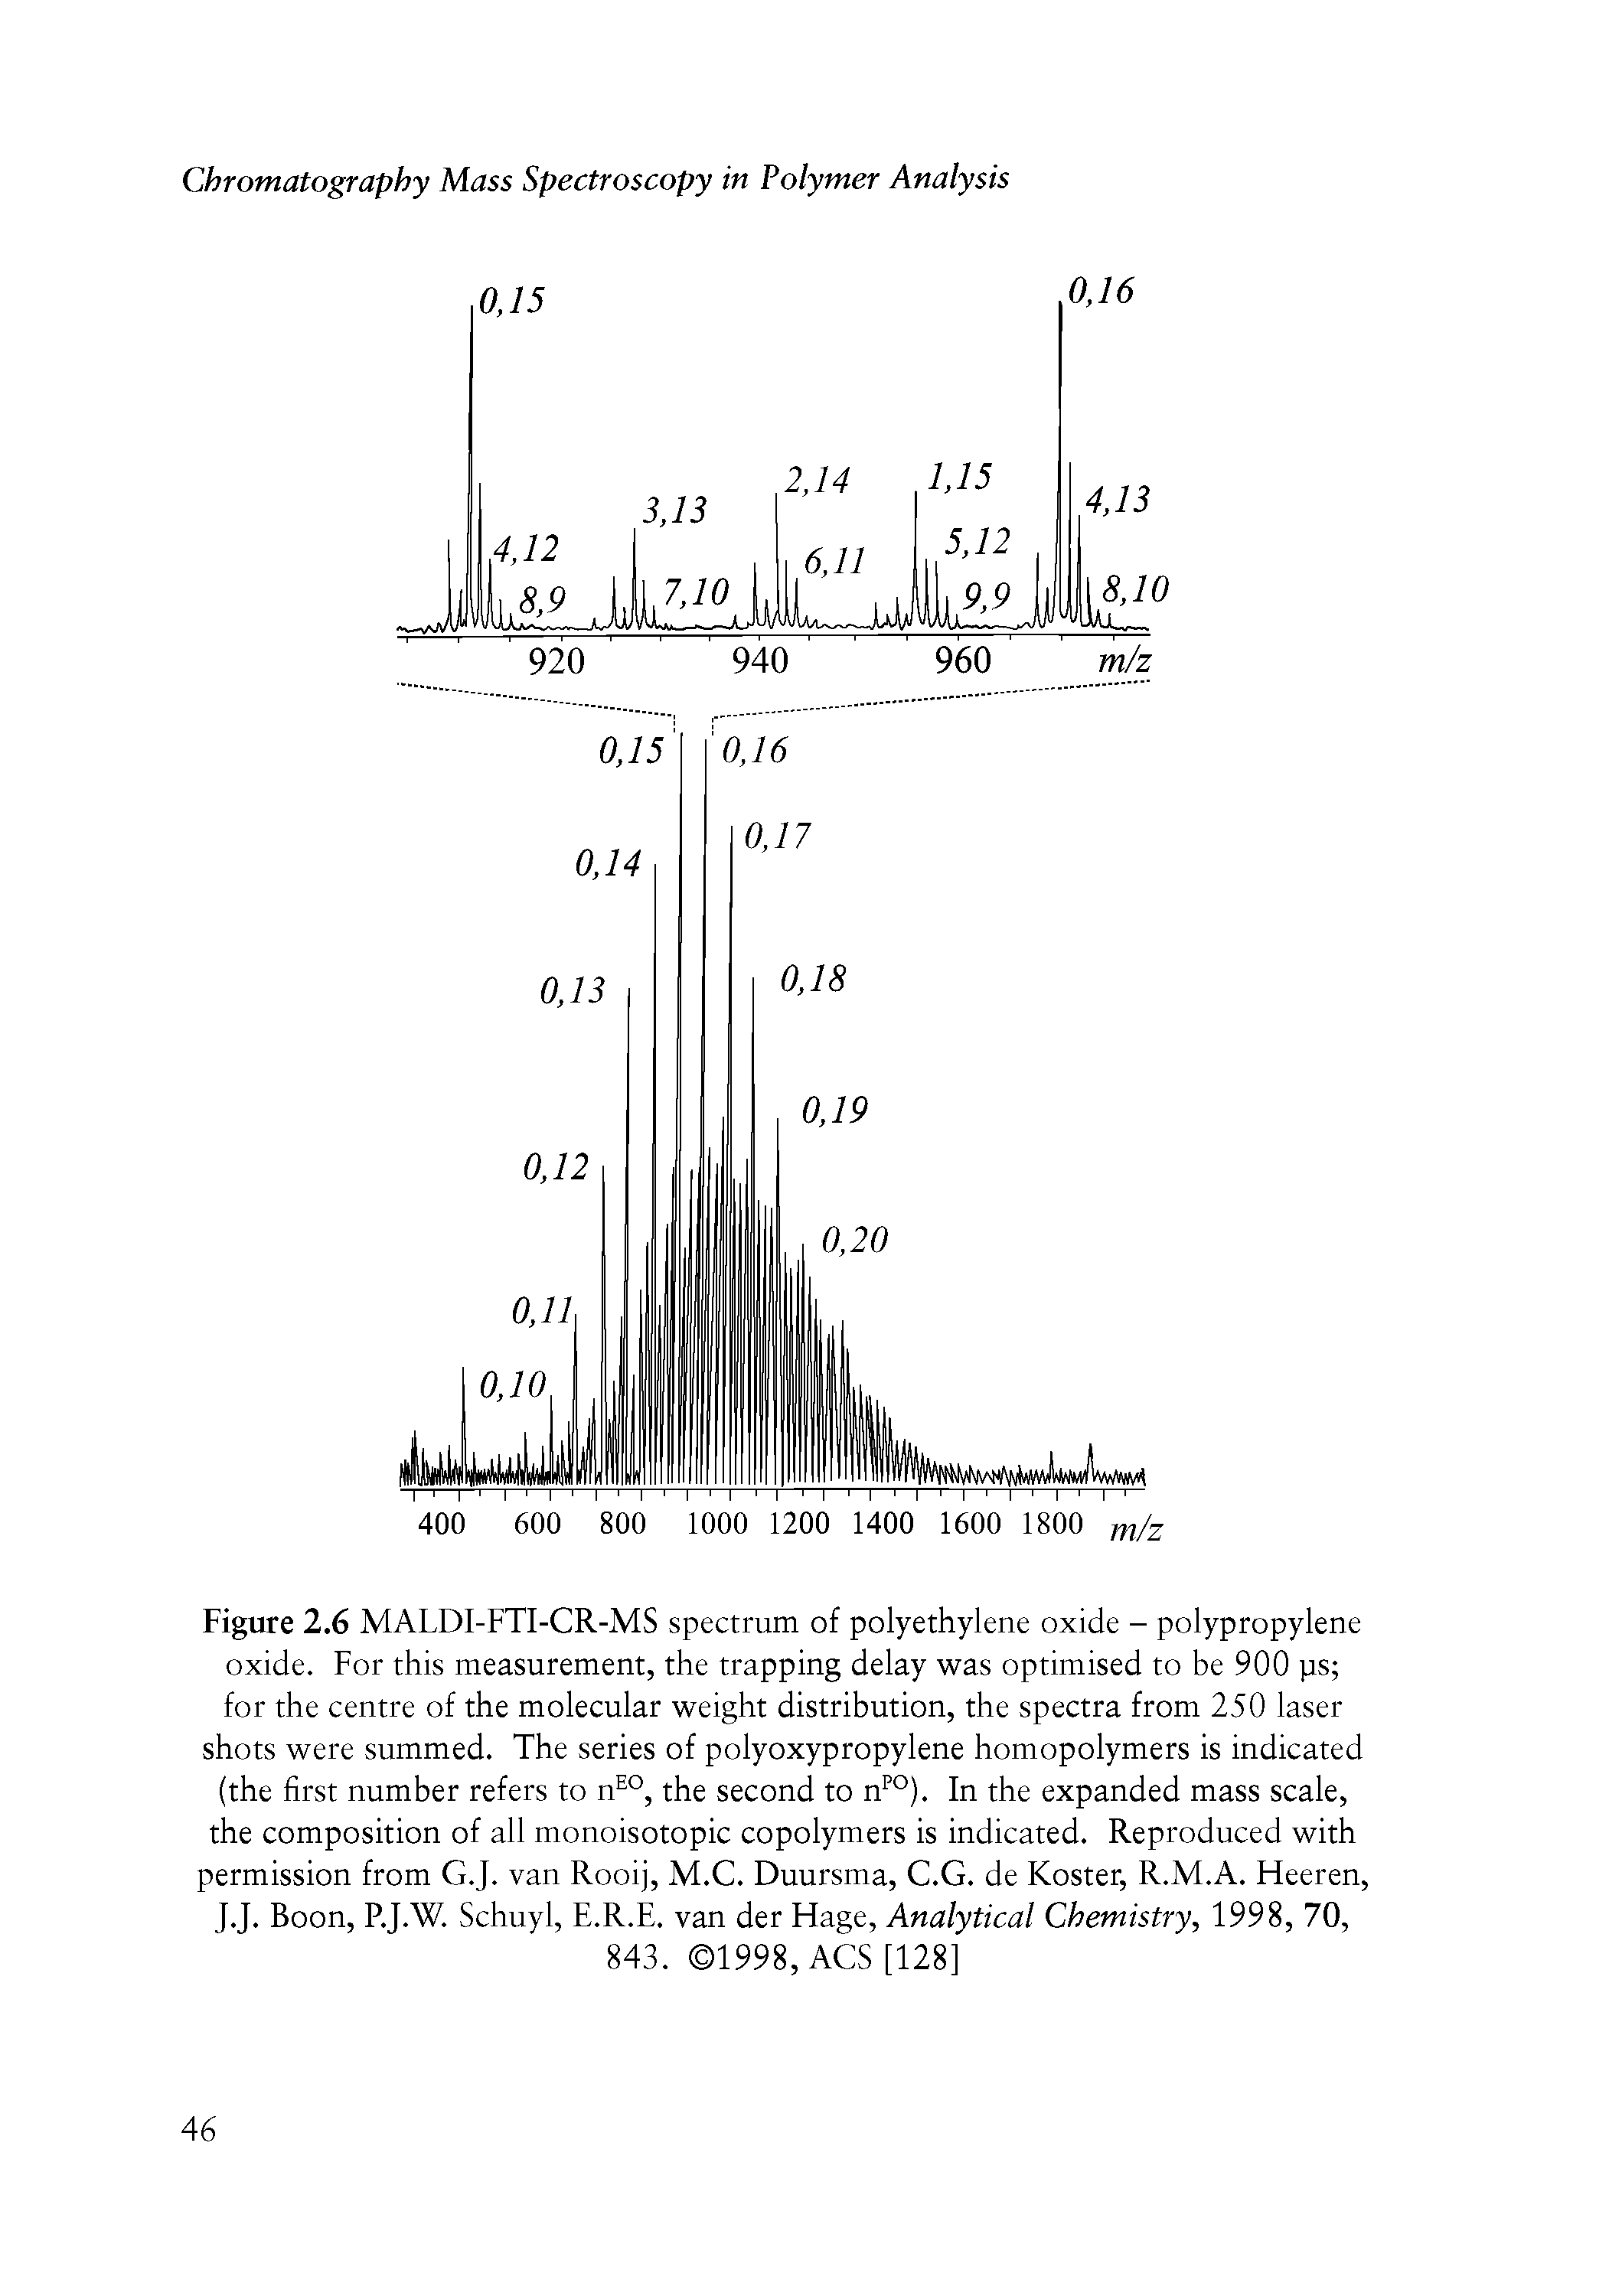 Figure 2.6 MALDI-FTI-CR-MS spectrum of polyethylene oxide - polypropylene oxide. For this measurement, the trapping delay was optimised to be 900 ps for the centre of the molecular weight distribution, the spectra from 250 laser shots were summed. The series of polyoxypropylene homopolymers is indicated (the first number refers to n °, the second to n °). In the expanded mass scale, the composition of all monoisotopic copolymers is indicated. Reproduced with permission from G.J. van Rooij, M.C. Duursma, C.G. de Koster, R.M.A. Heeren, J.J. Boon, RJ.W. Schuyl, E.R.E. van der Hage, Analytical Chemistry, 1998, 70,...